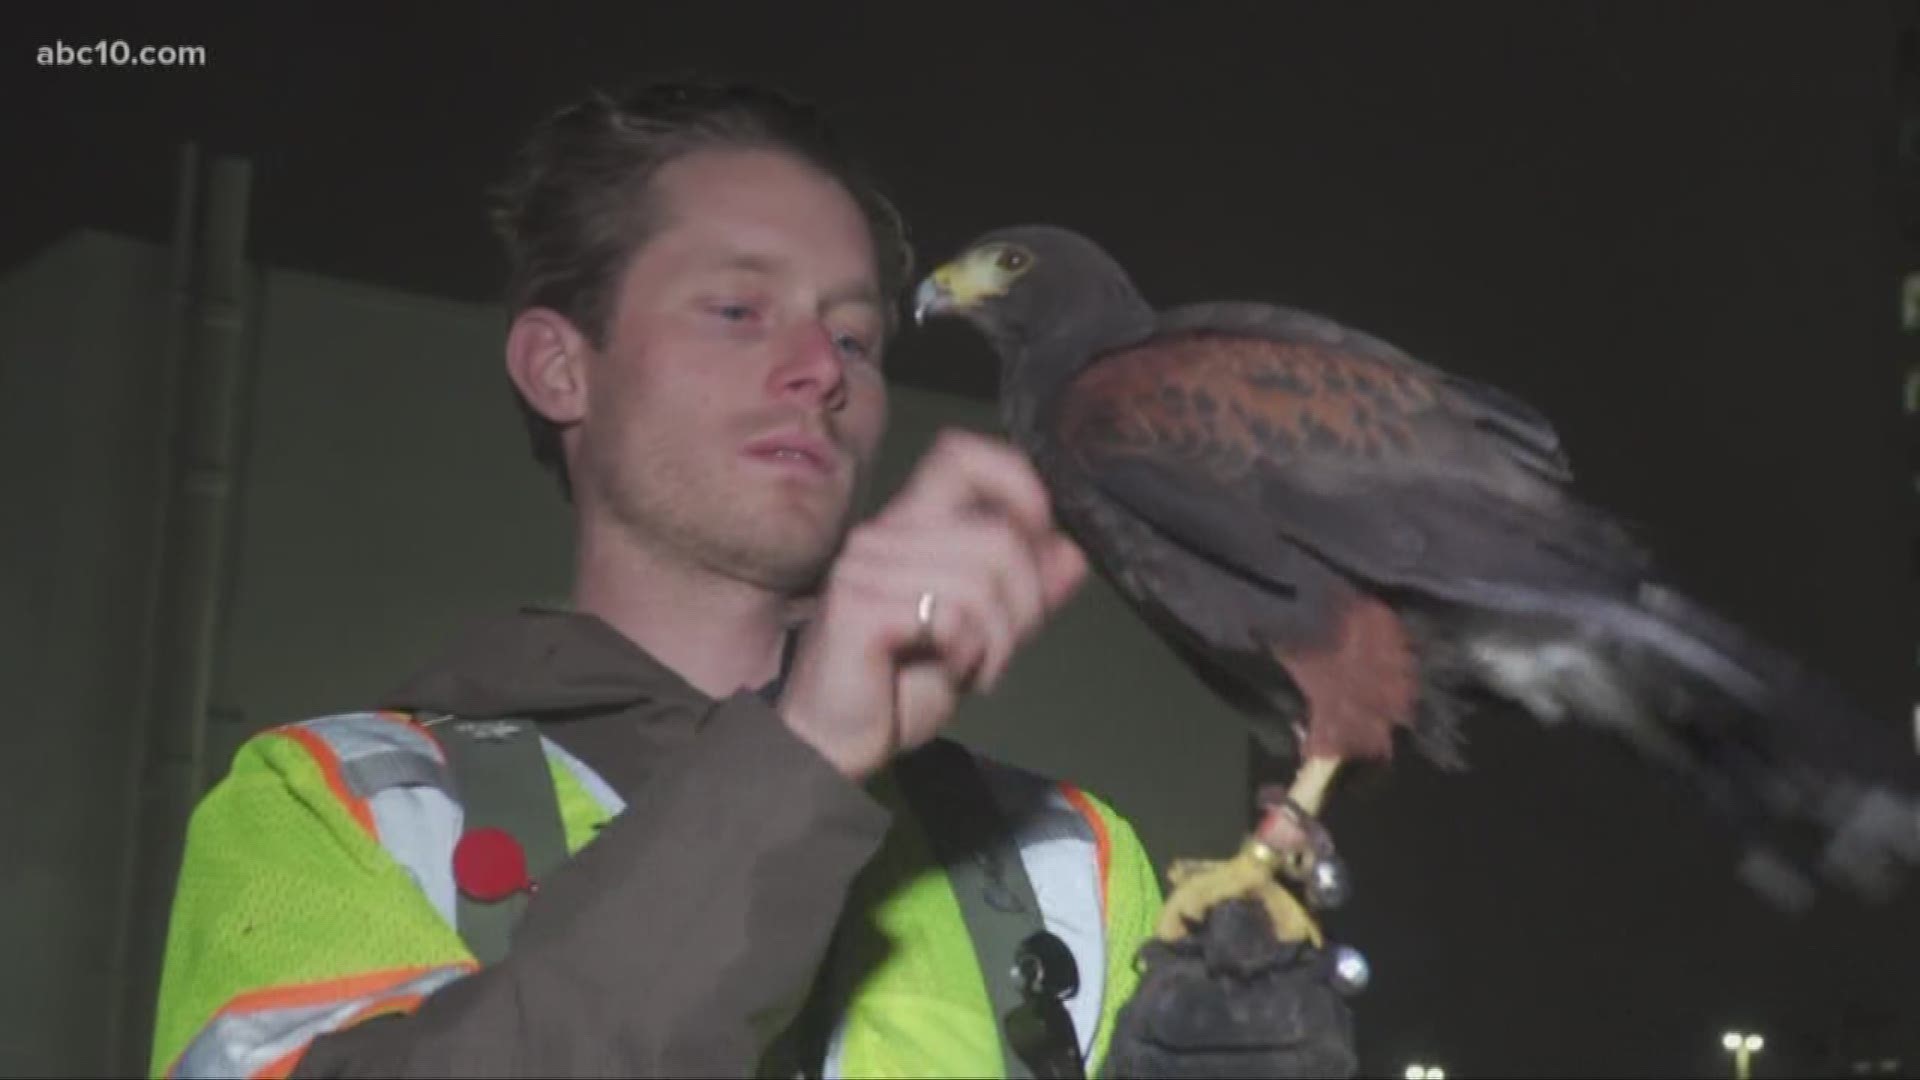 There are birds of prey on patrol in Downtown Sacramento. Their mission? To get rid of nuisance birds like crows and the droppings they leave behind.